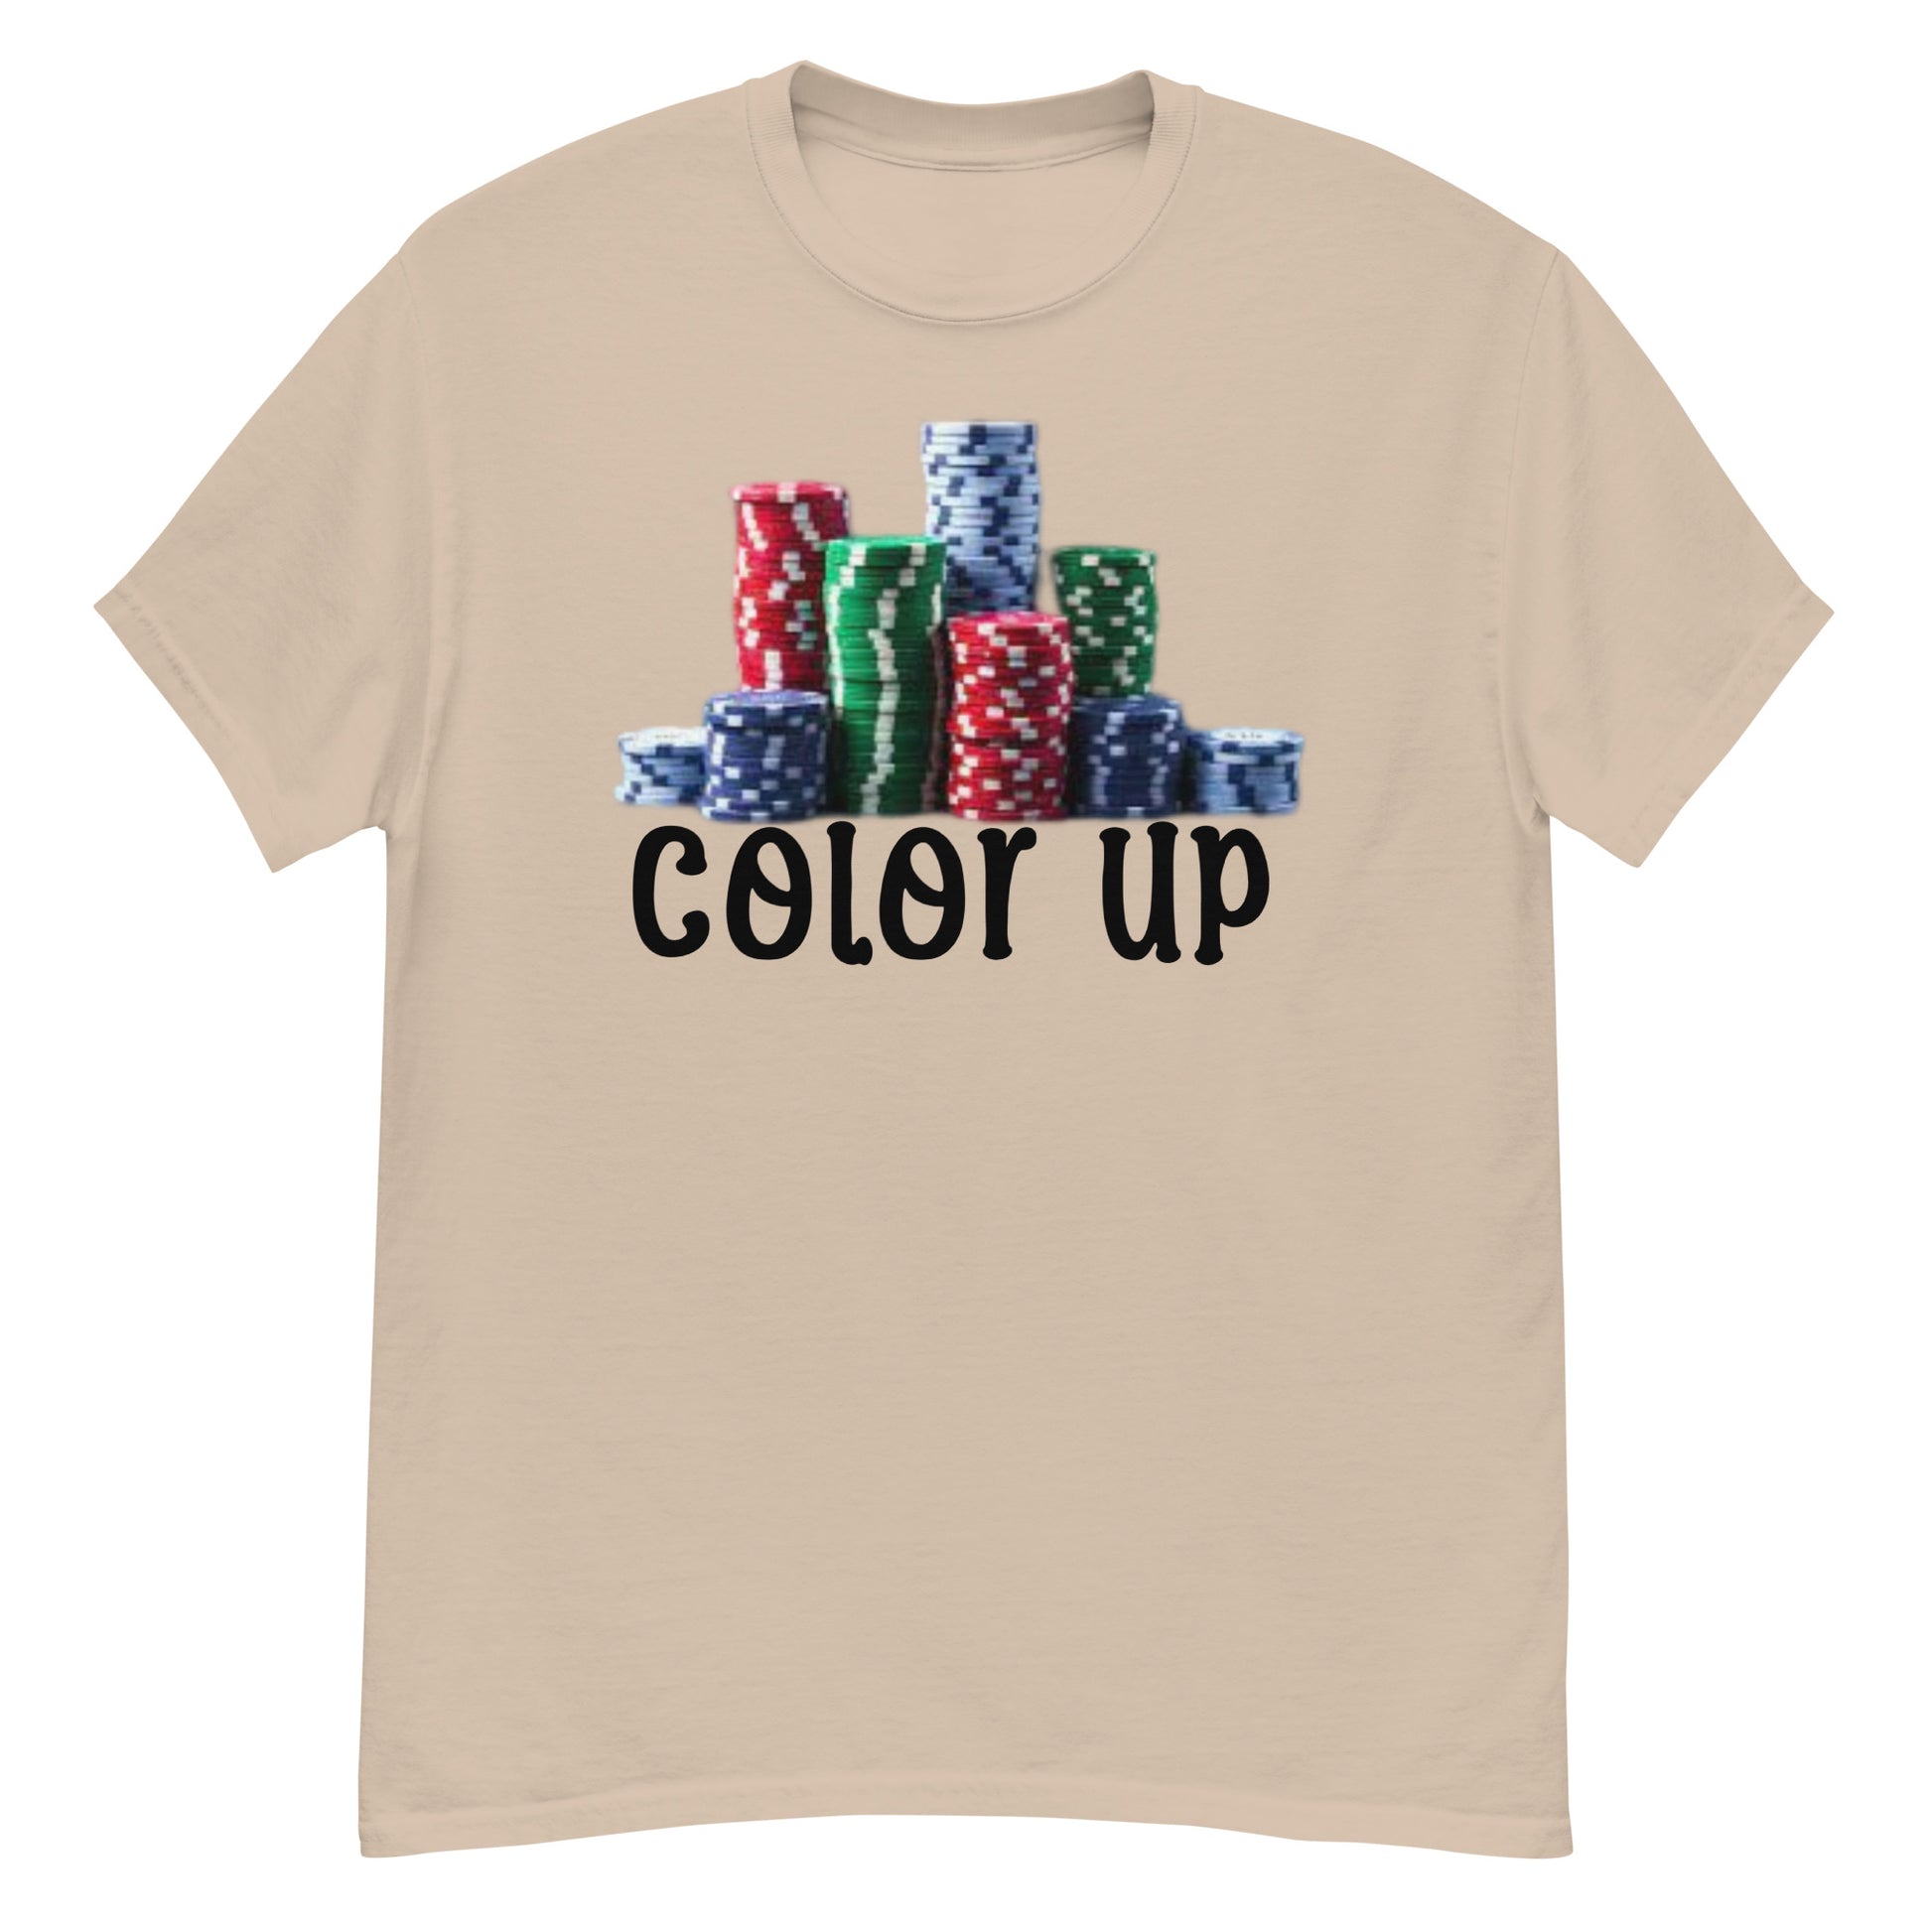 Color up chips craps  and dice shirt